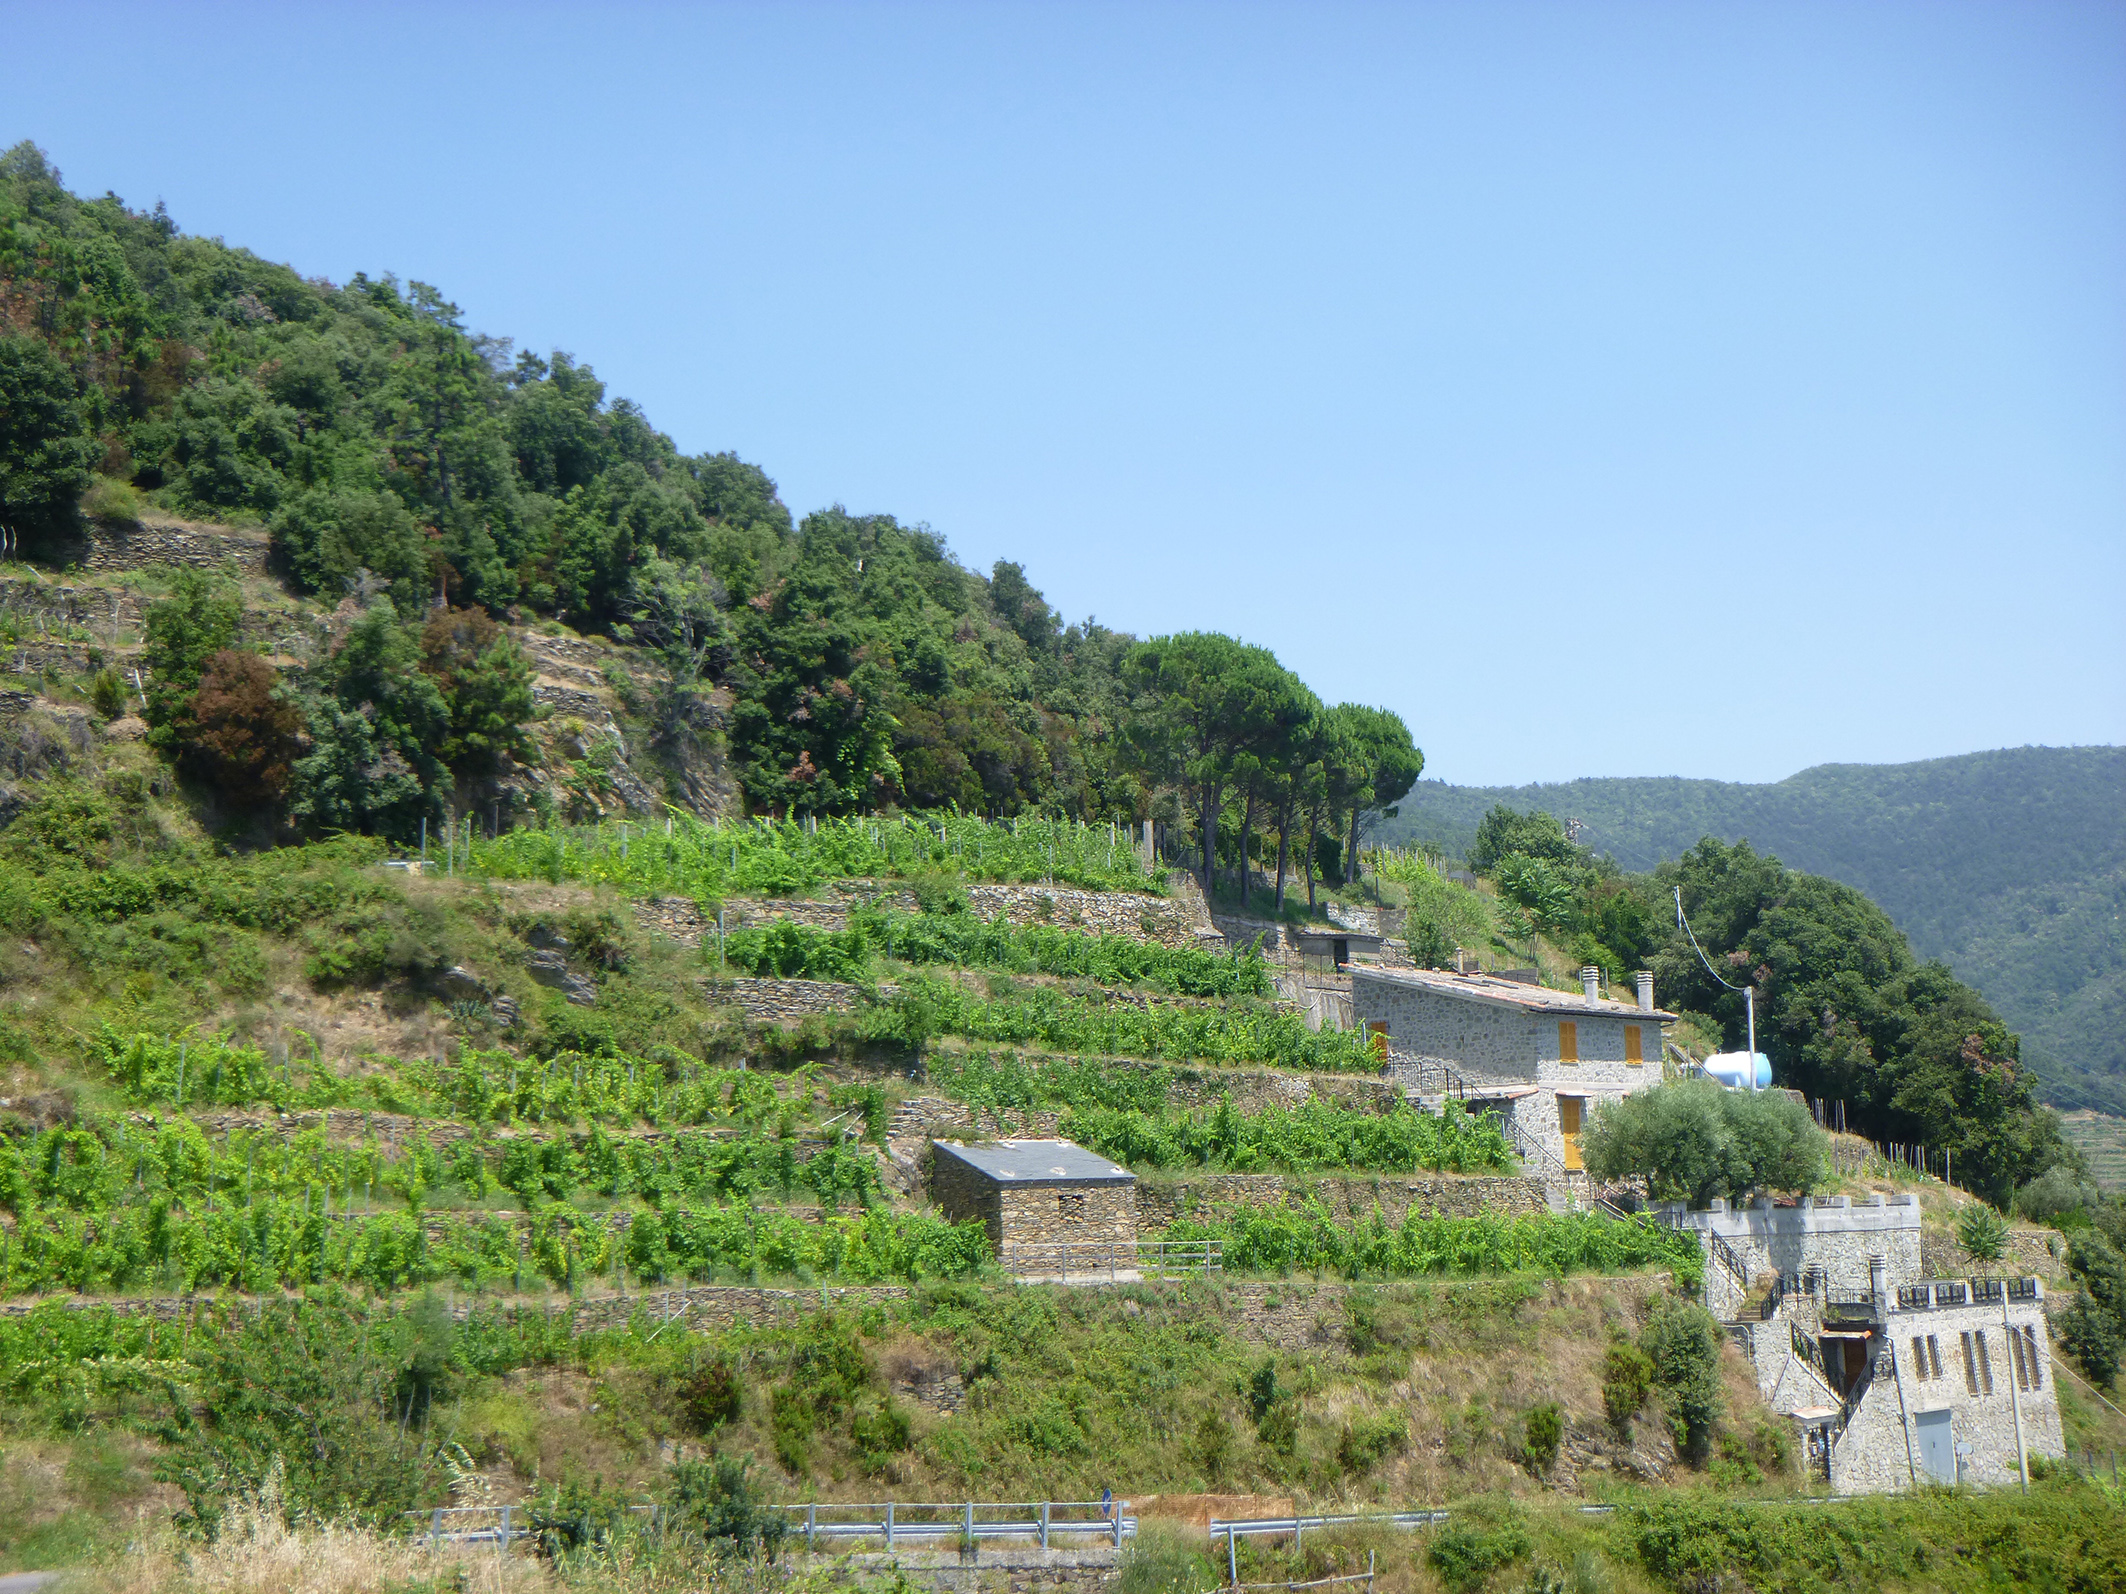 Inspection in the terraced vineyards of the Cinque Terre National Park